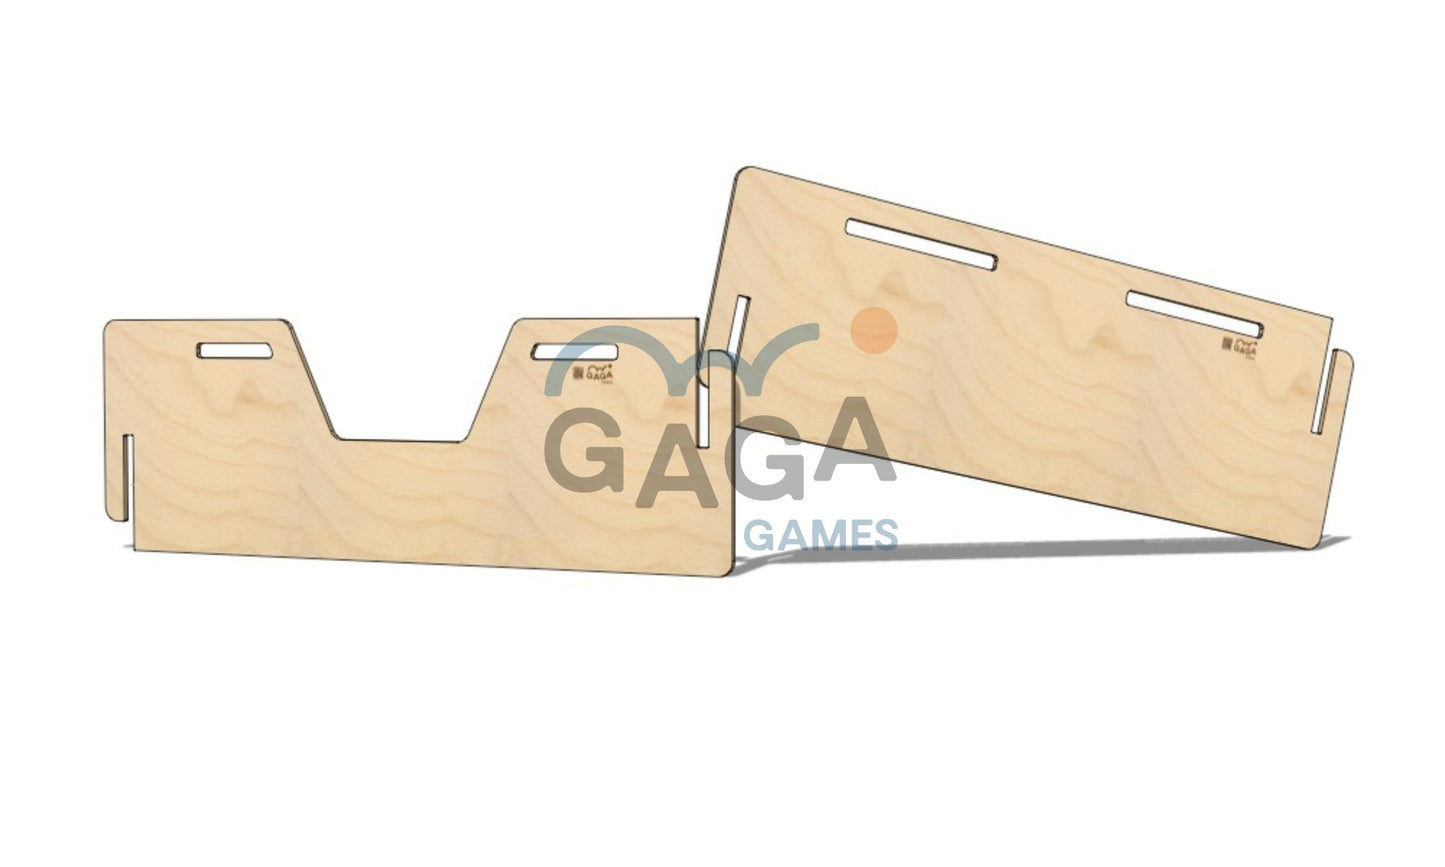 Gaga Games Portable Gaga Pit Kits slide together. You can setup a temporary game of Gaga with just 2 people in minutes!